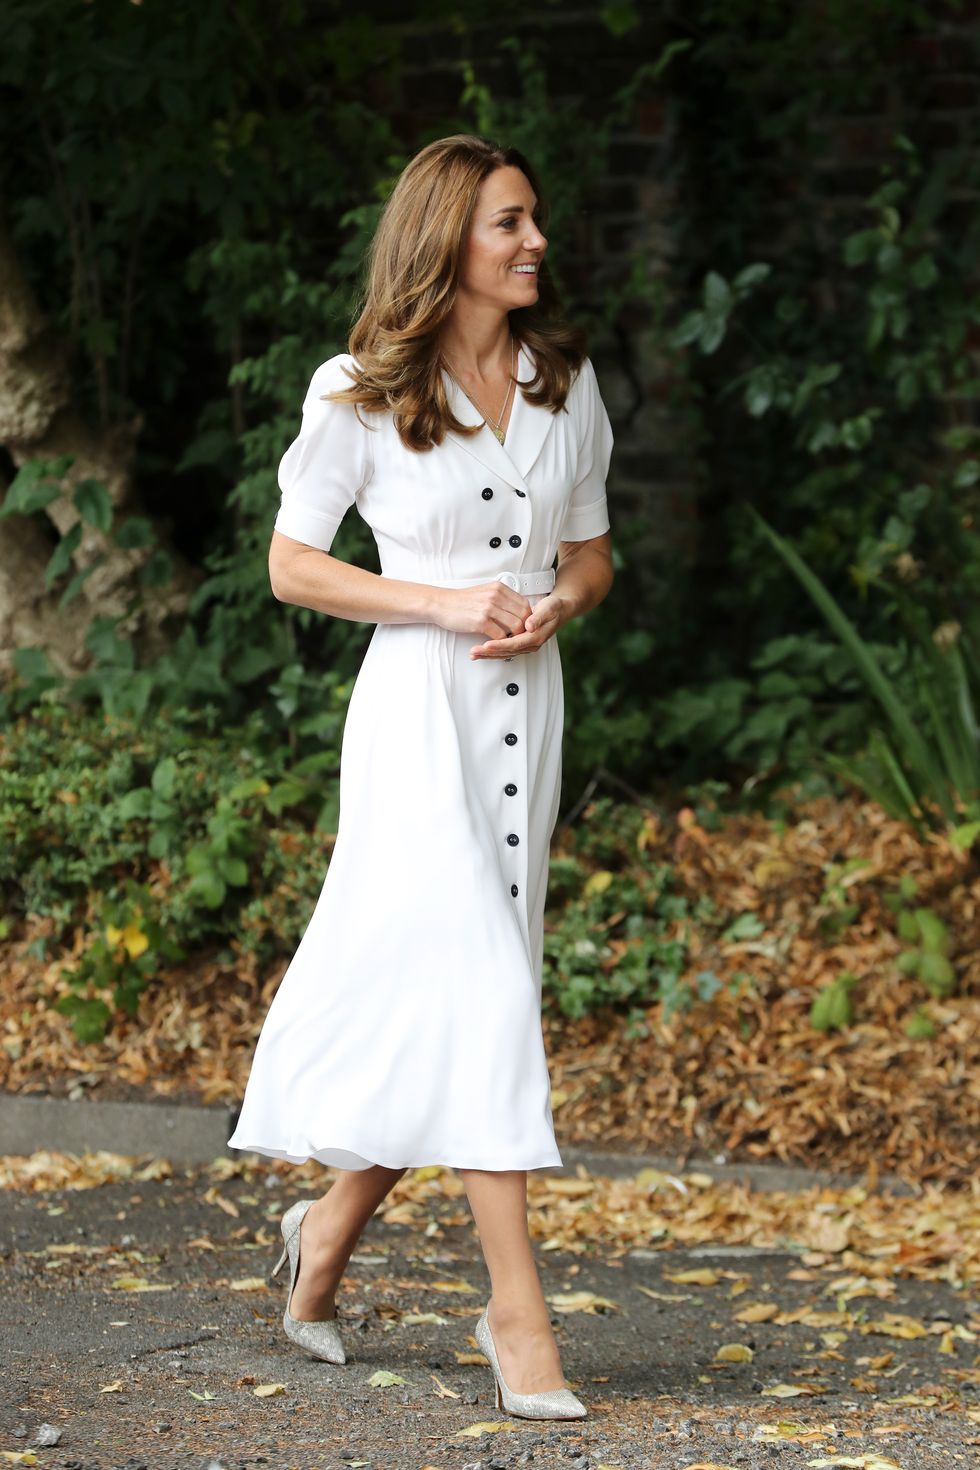 sheffield, england   august 04 catherine, duchess of cambridge arrives for a visit to baby basic uk  baby basics sheffield on august 04, 2020 in sheffield, england baby basics is a volunteer project supporting families in need struggling to provide for their newborns photo by chris jackson   wpa poolgetty images